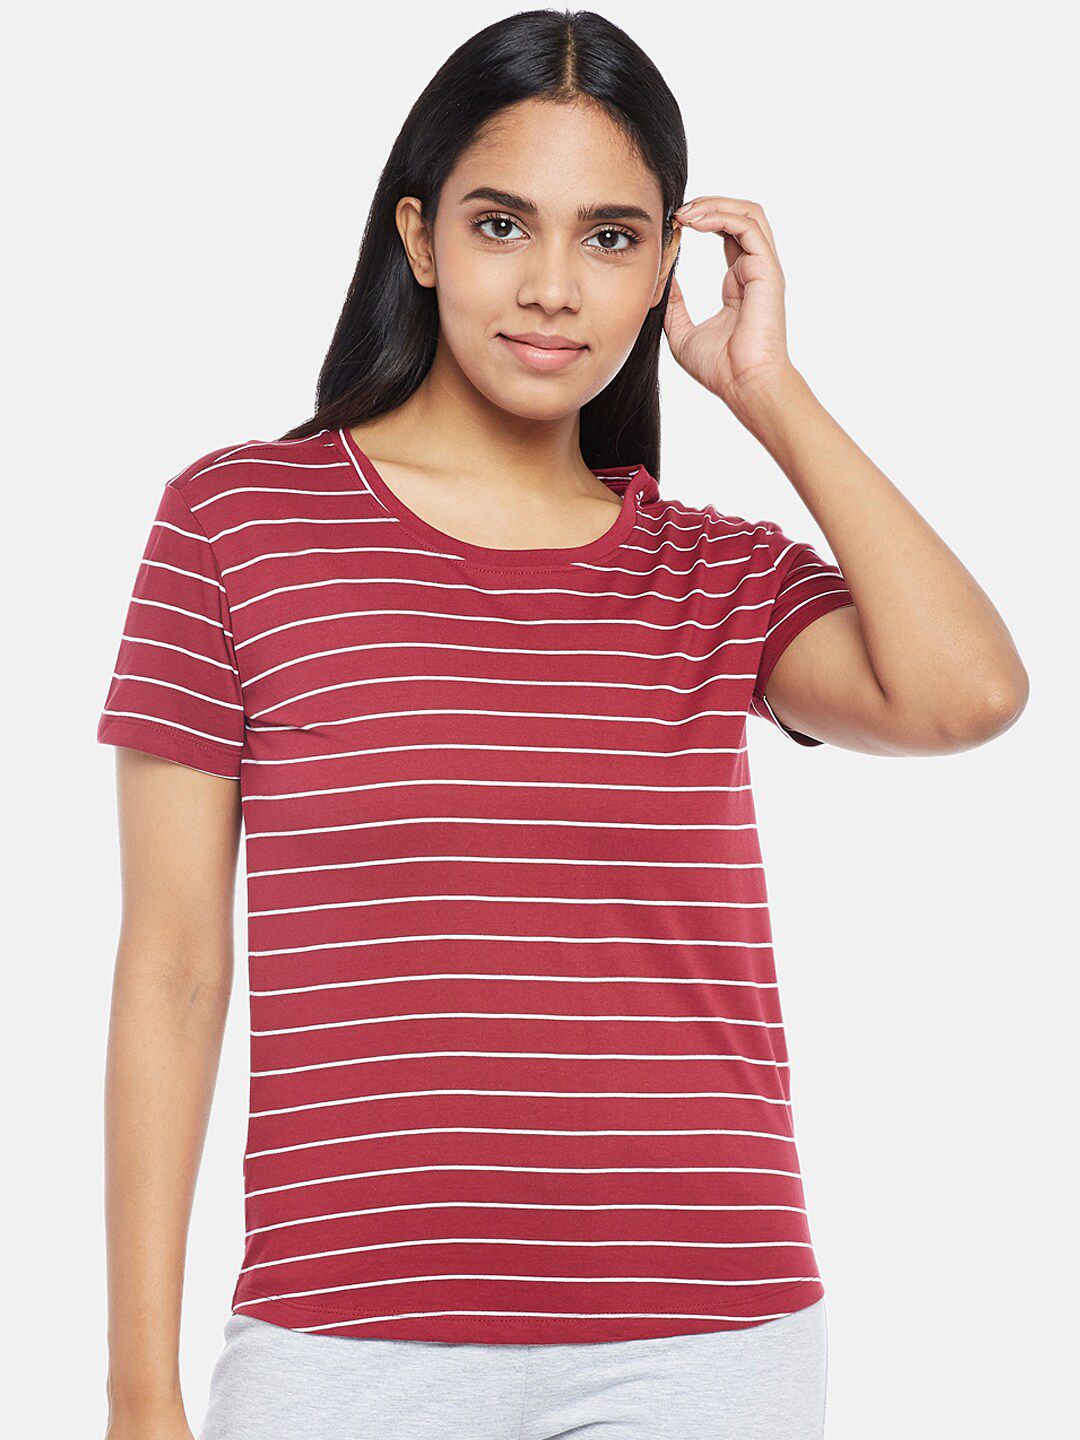 Dreamz by Pantaloons Women Red Striped Pockets Lounge T-shirt Price in India